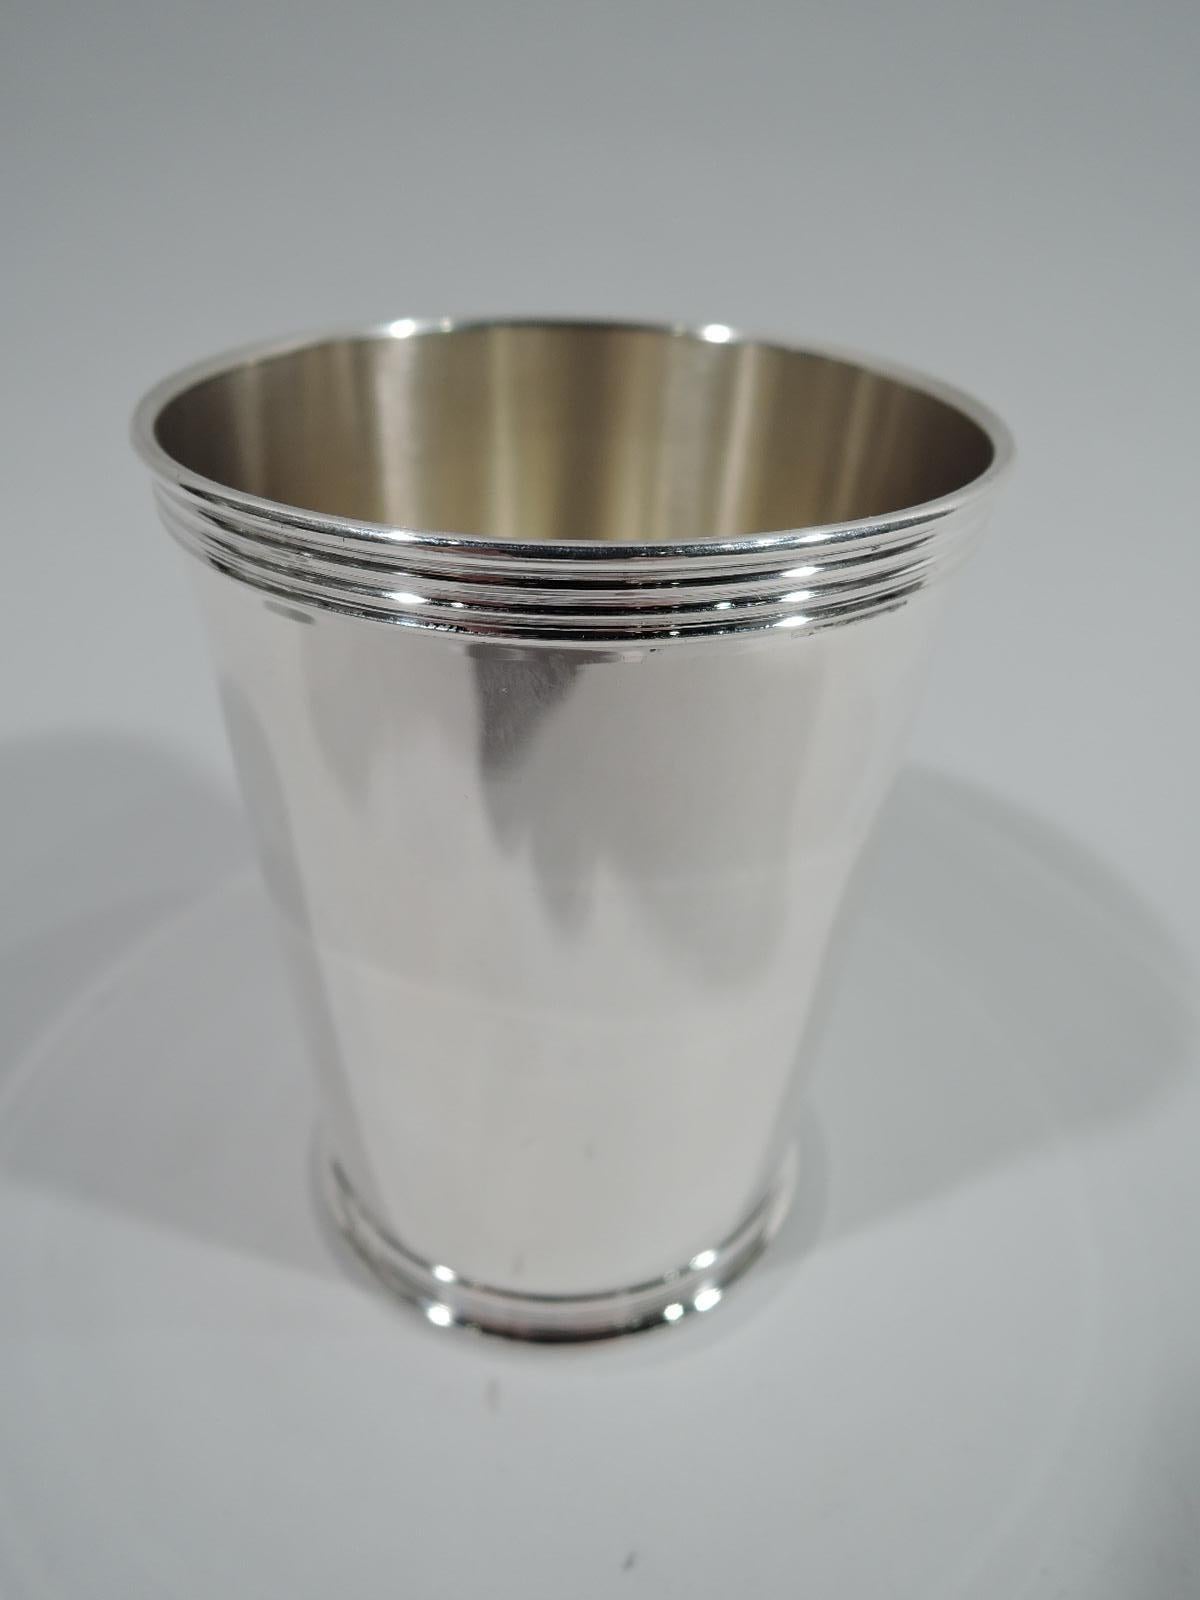 Set of 4 traditional sterling silver mint julep cups. Made by Manchester in Providence. Each: Straight and tapering sides, and reeded rim and foot. Fully marked including maker’s stamp and no. 3759. Total weight: 16 troy ounces.